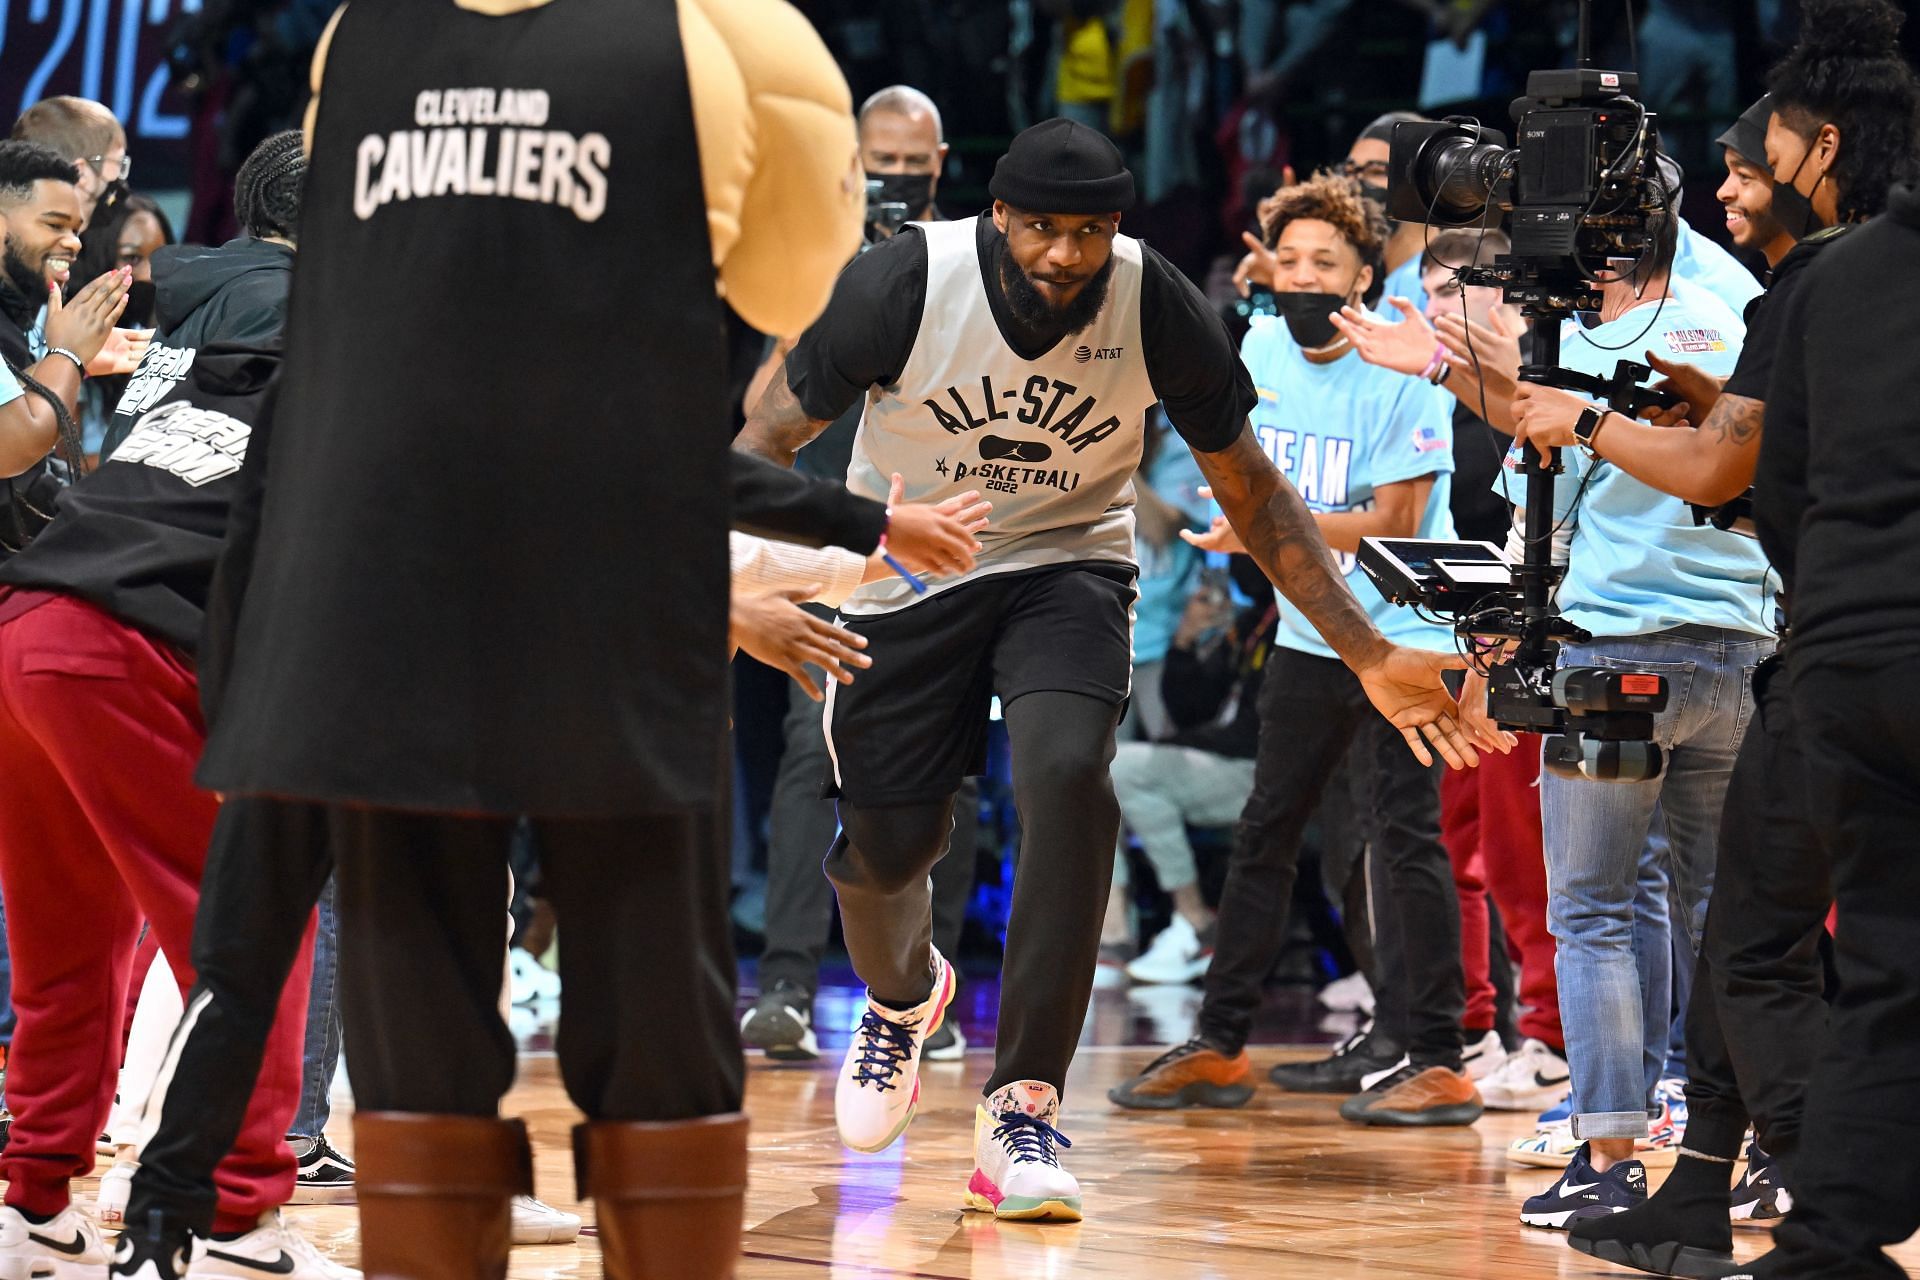 LeBron James #6 of Team LeBron celebrates during the NBA All-Star practice